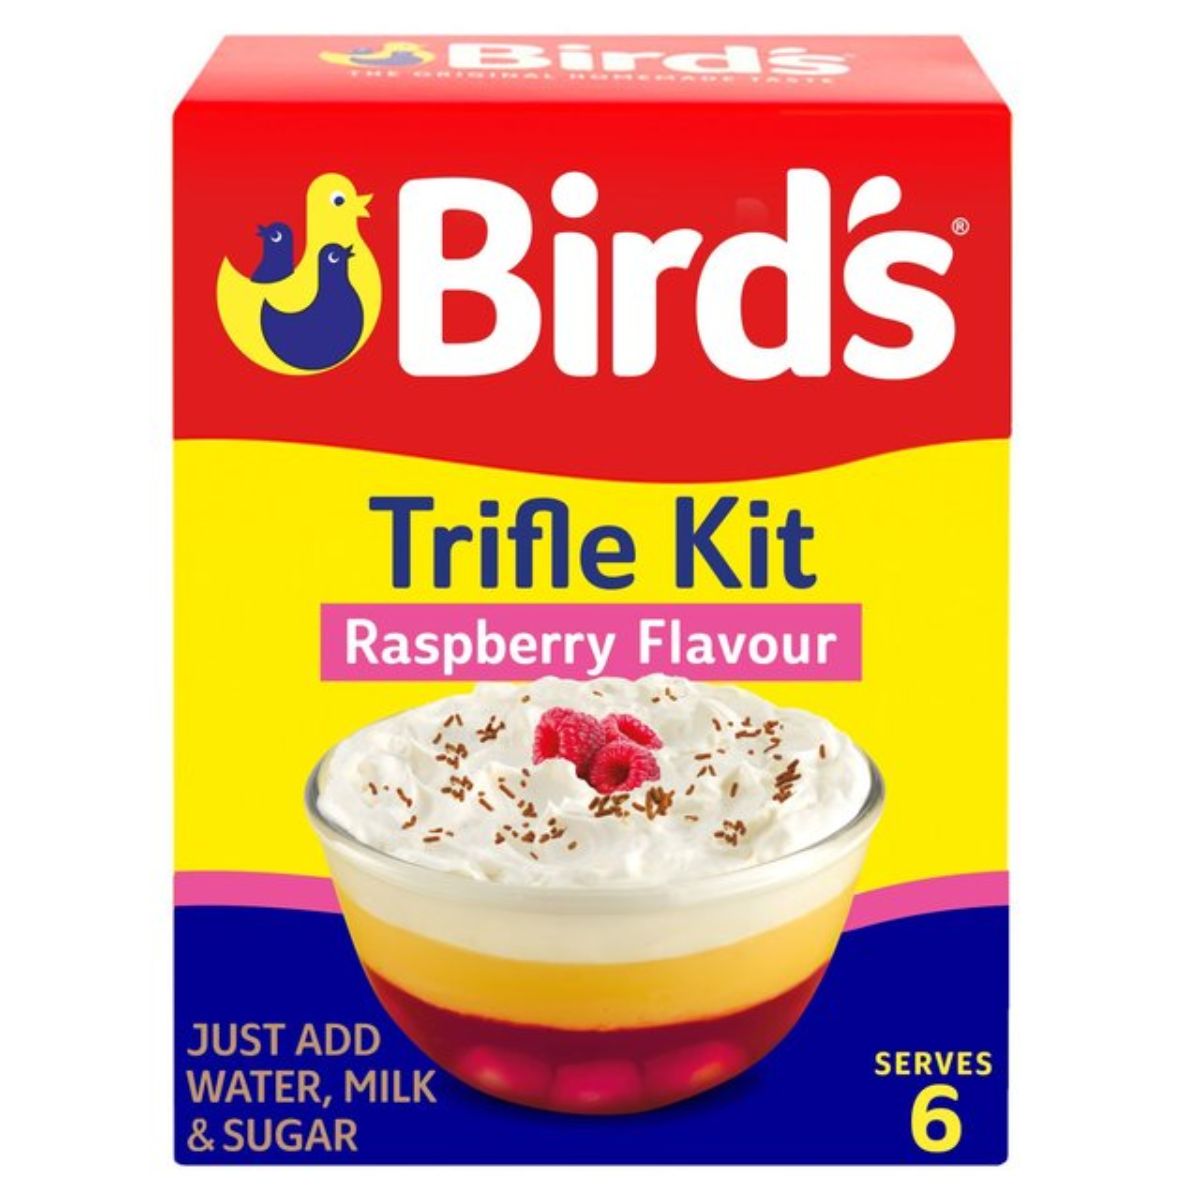 A Birds - Trifle Kit Raspberry Flavour - 141g which serves 6, with instructions to add water, milk, and sugar.